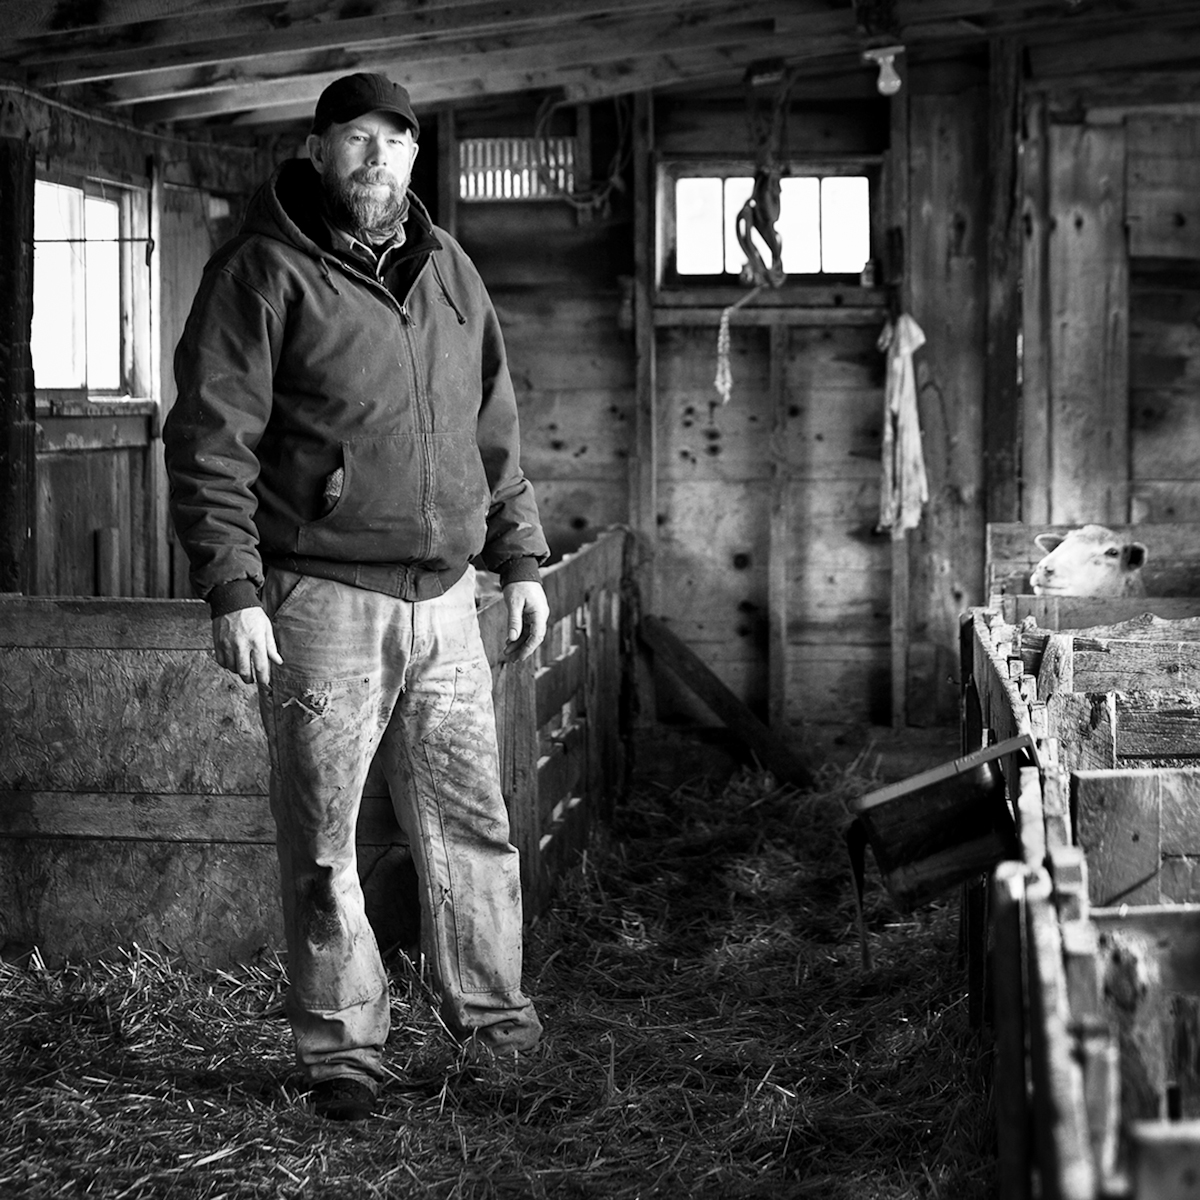   Regan Smith; fourth generation farmer and rancher on his great-grandparent's homestead.  